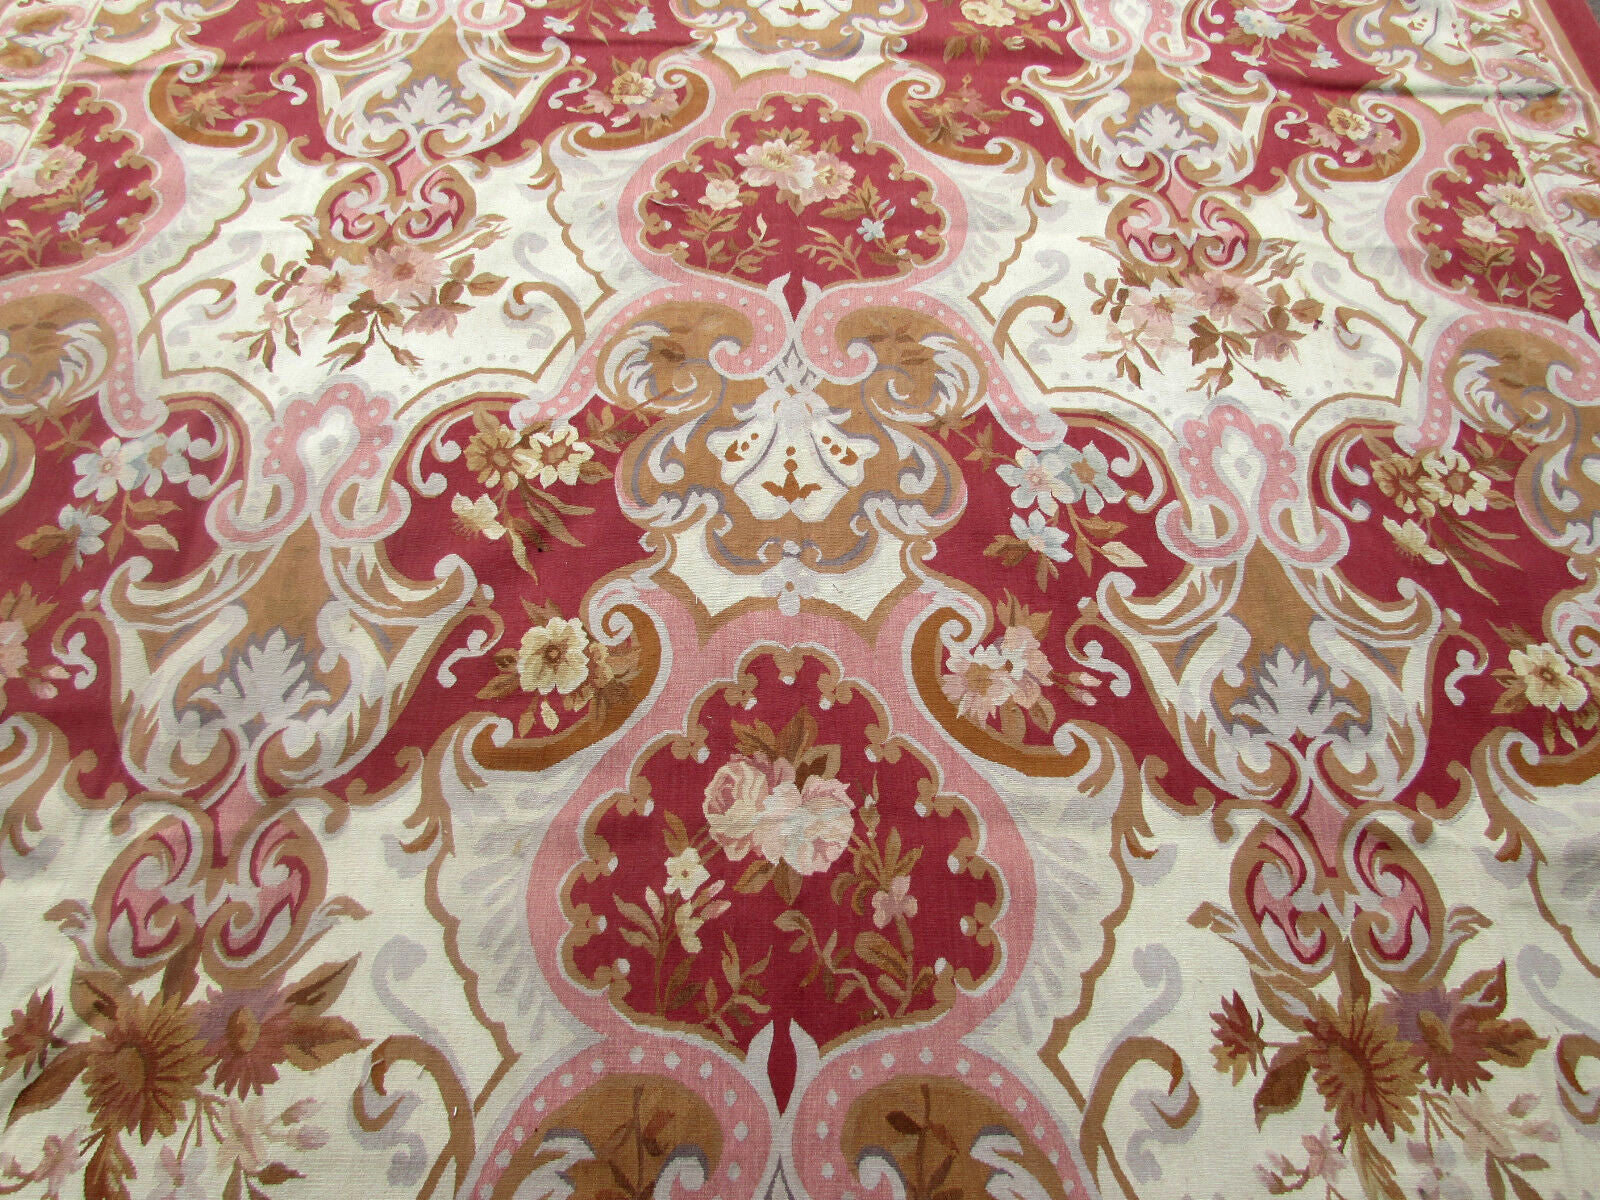 Close-up of the intricate patterns and designs on the Aubusson Rug